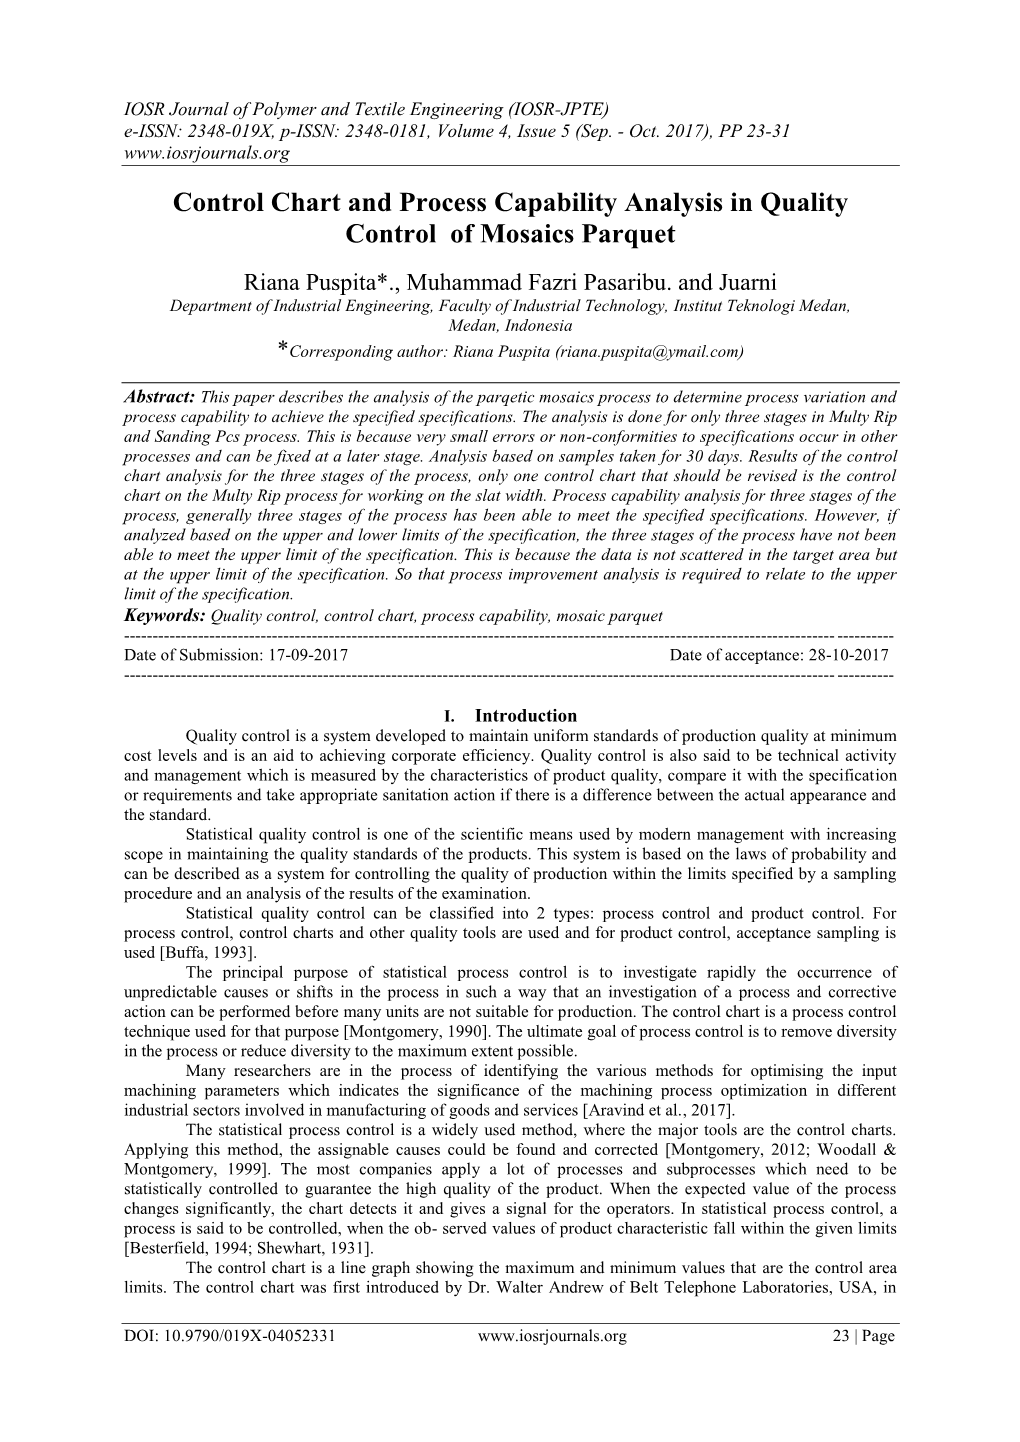 Control Chart and Process Capability Analysis in Quality Control of Mosaics Parquet